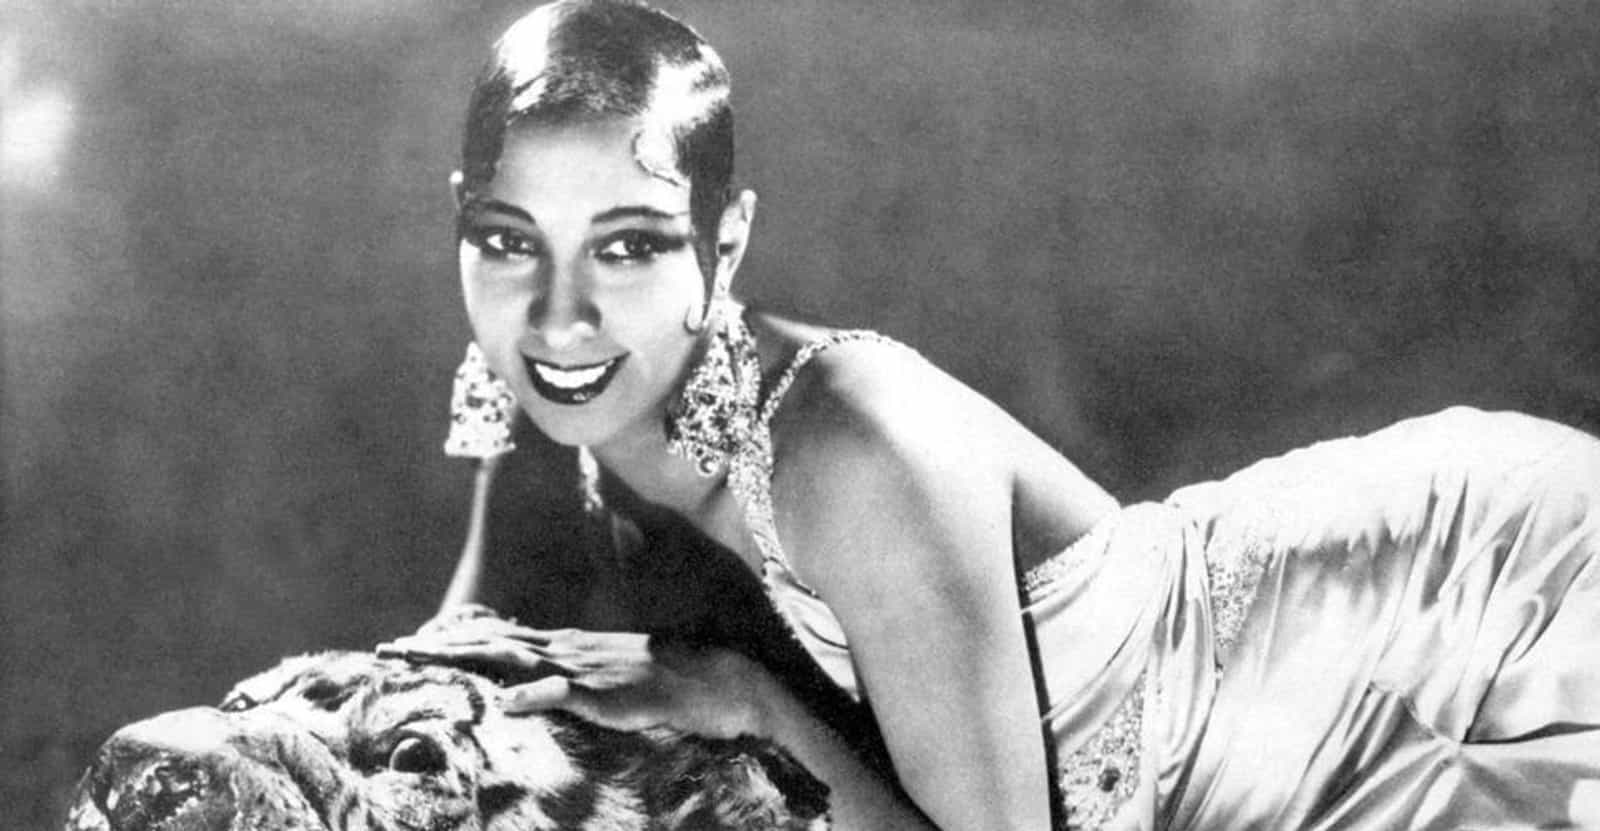 From Scantily Clad Dancer To World War II Spy, Josephine Baker Laughed In The Face Of Traditions